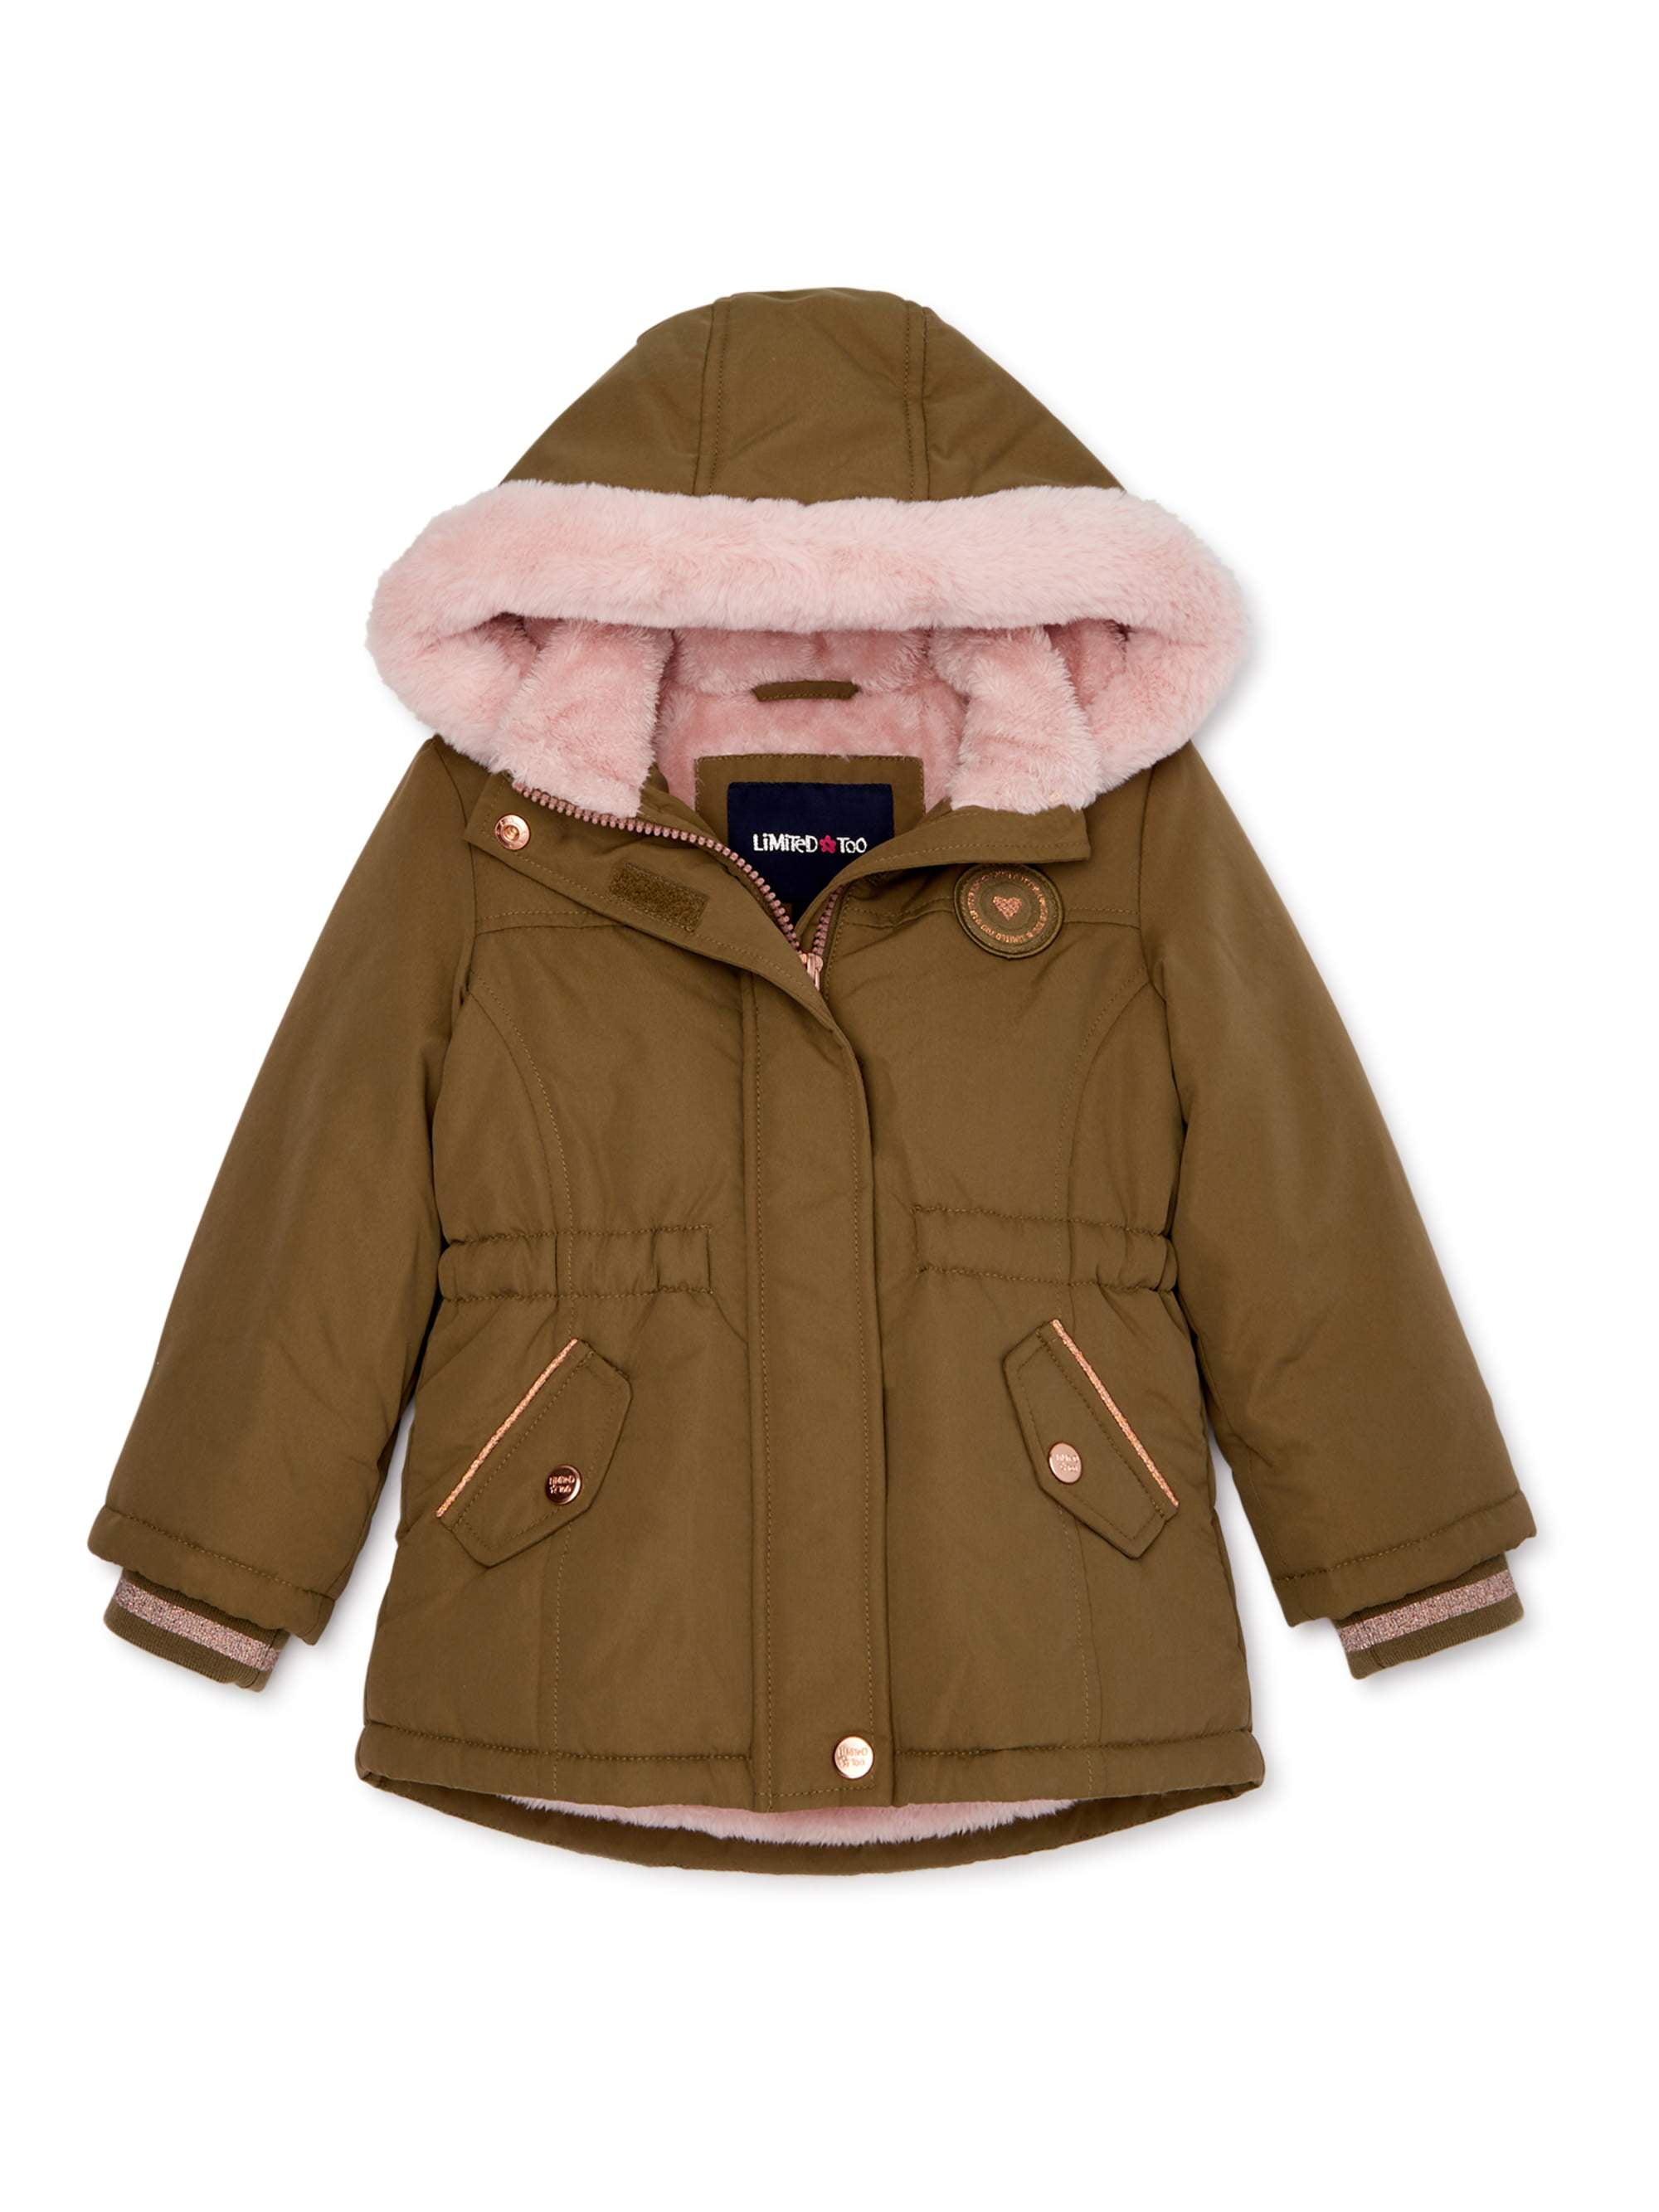 Limited Too Toddler Girl Faux Sherpa Anorak Winter Jacket Coat ...